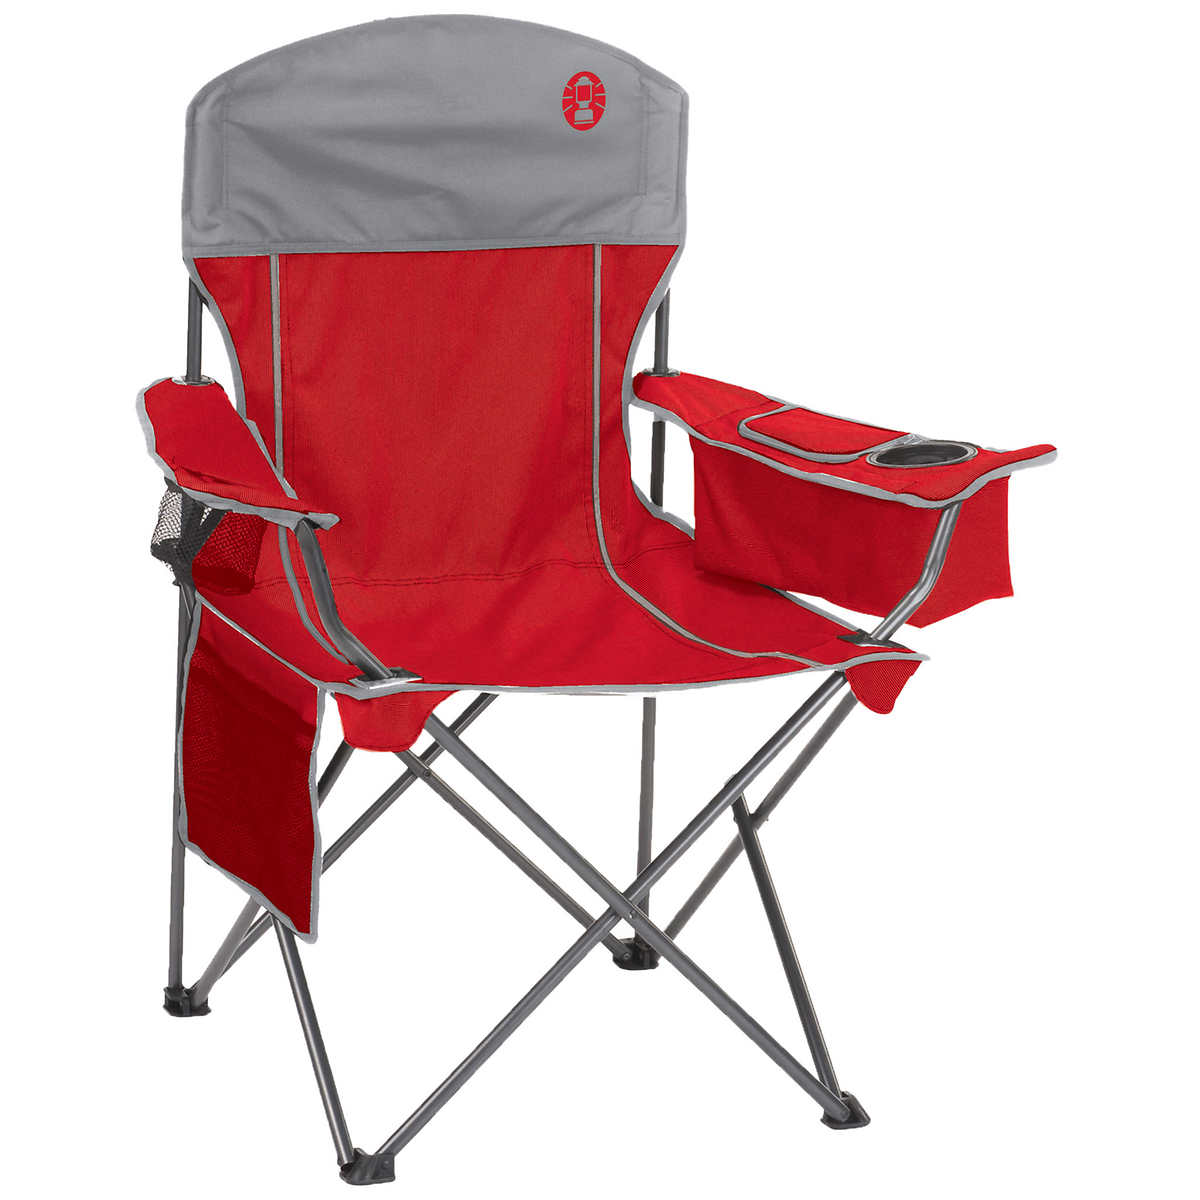 Coleman Oversized Quad Chair With Cooler Costco